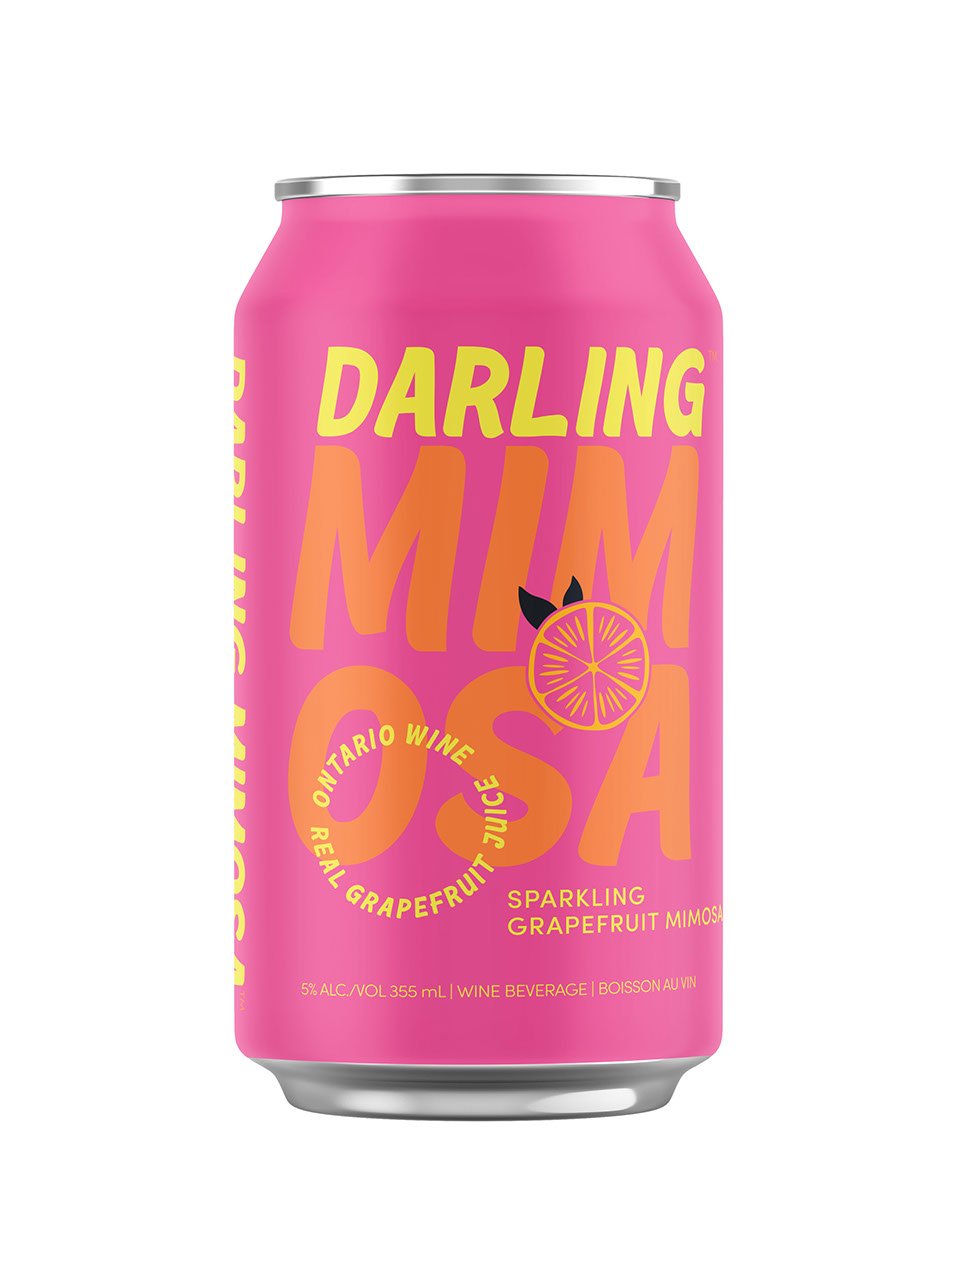 A can of Darling Mimosa Grapefruit